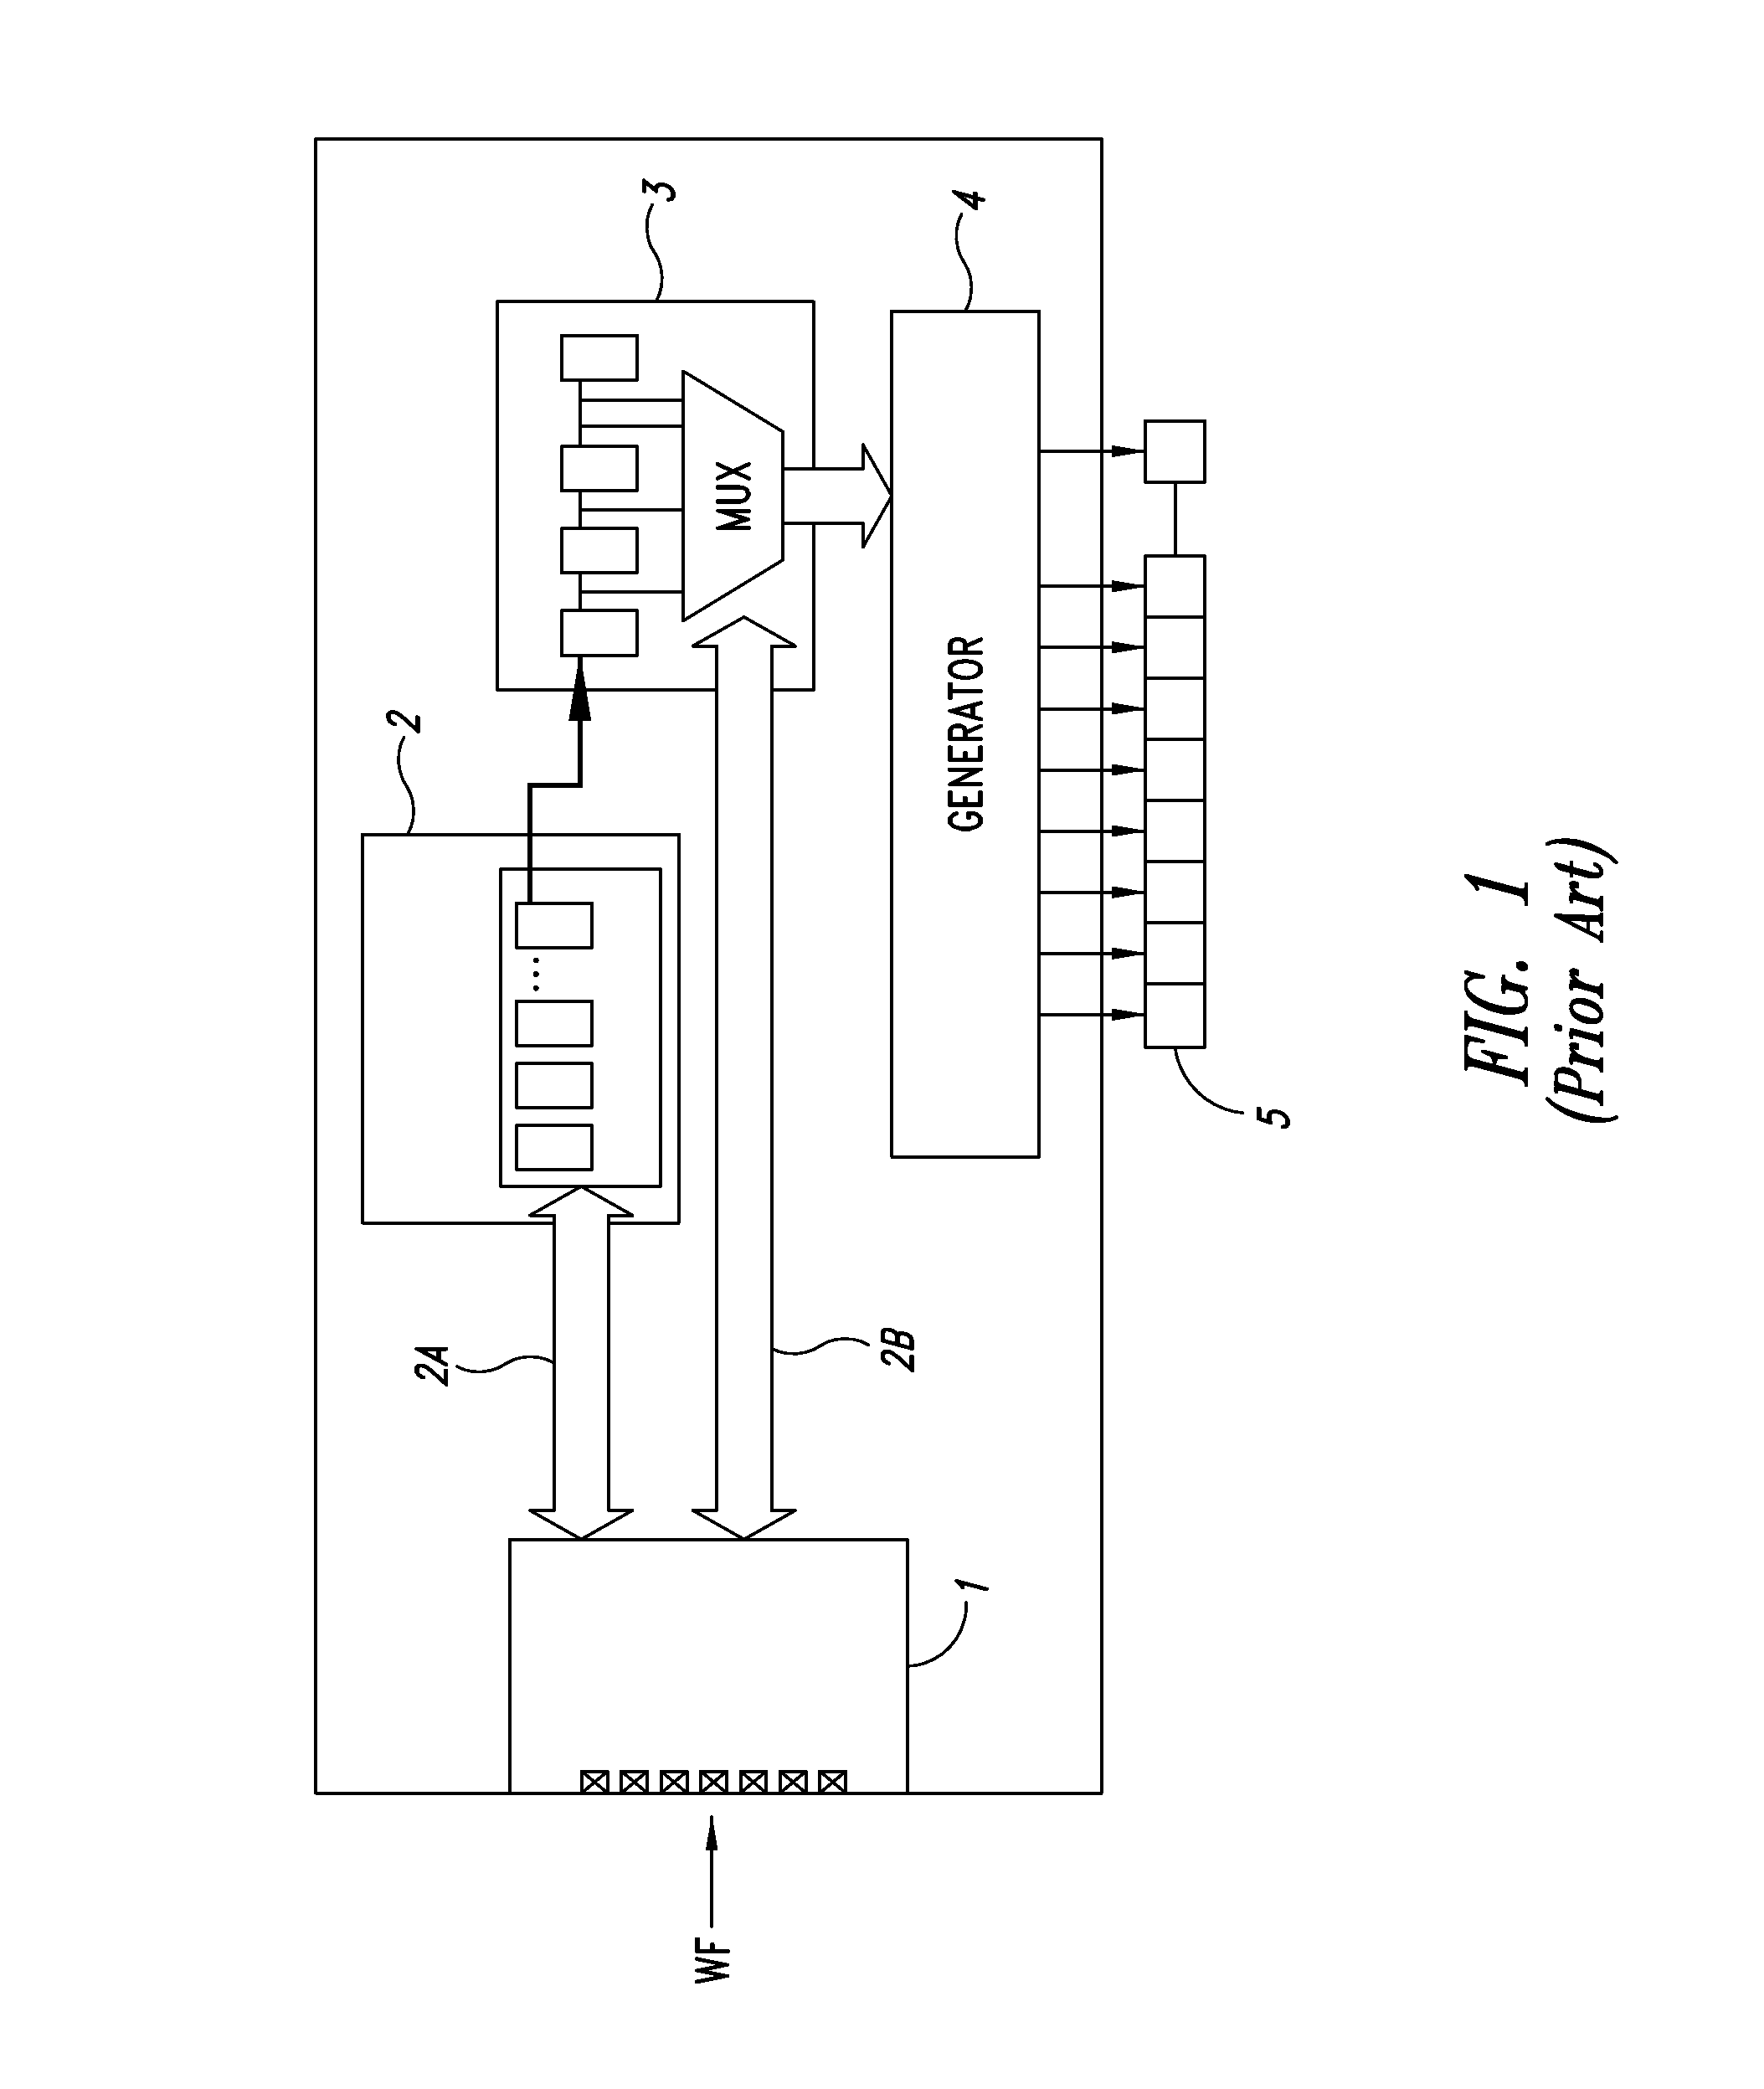 Method of setting a waveform signal in an ultrasound imaging apparatus and apparatus for setting an ultrasonic waveform signal using such method